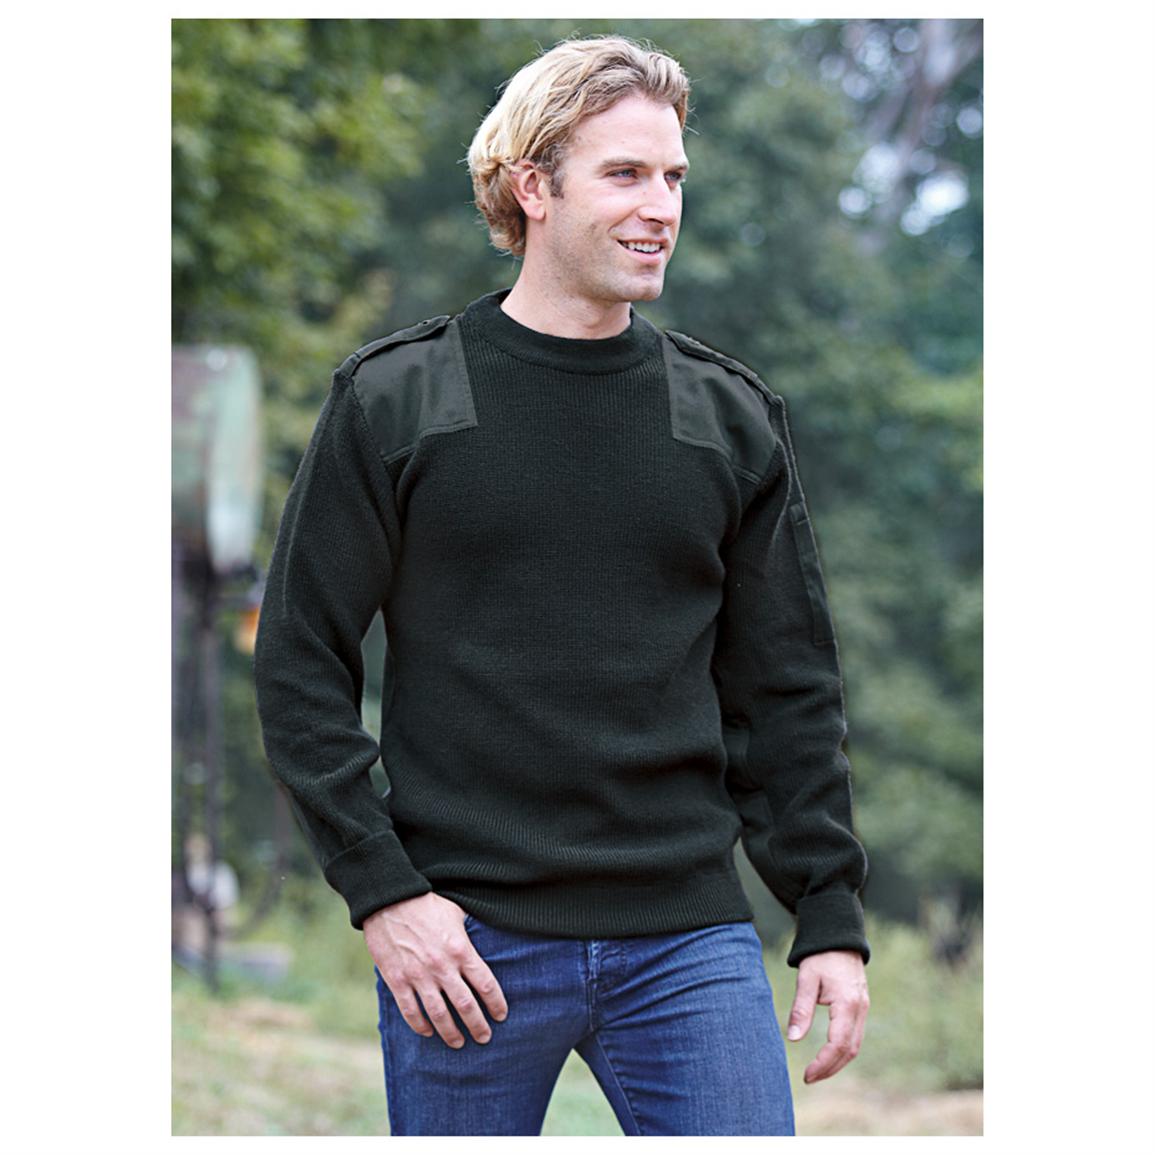 New Dutch army navy V neck wool sweater jumper pullover sweatshirt military 